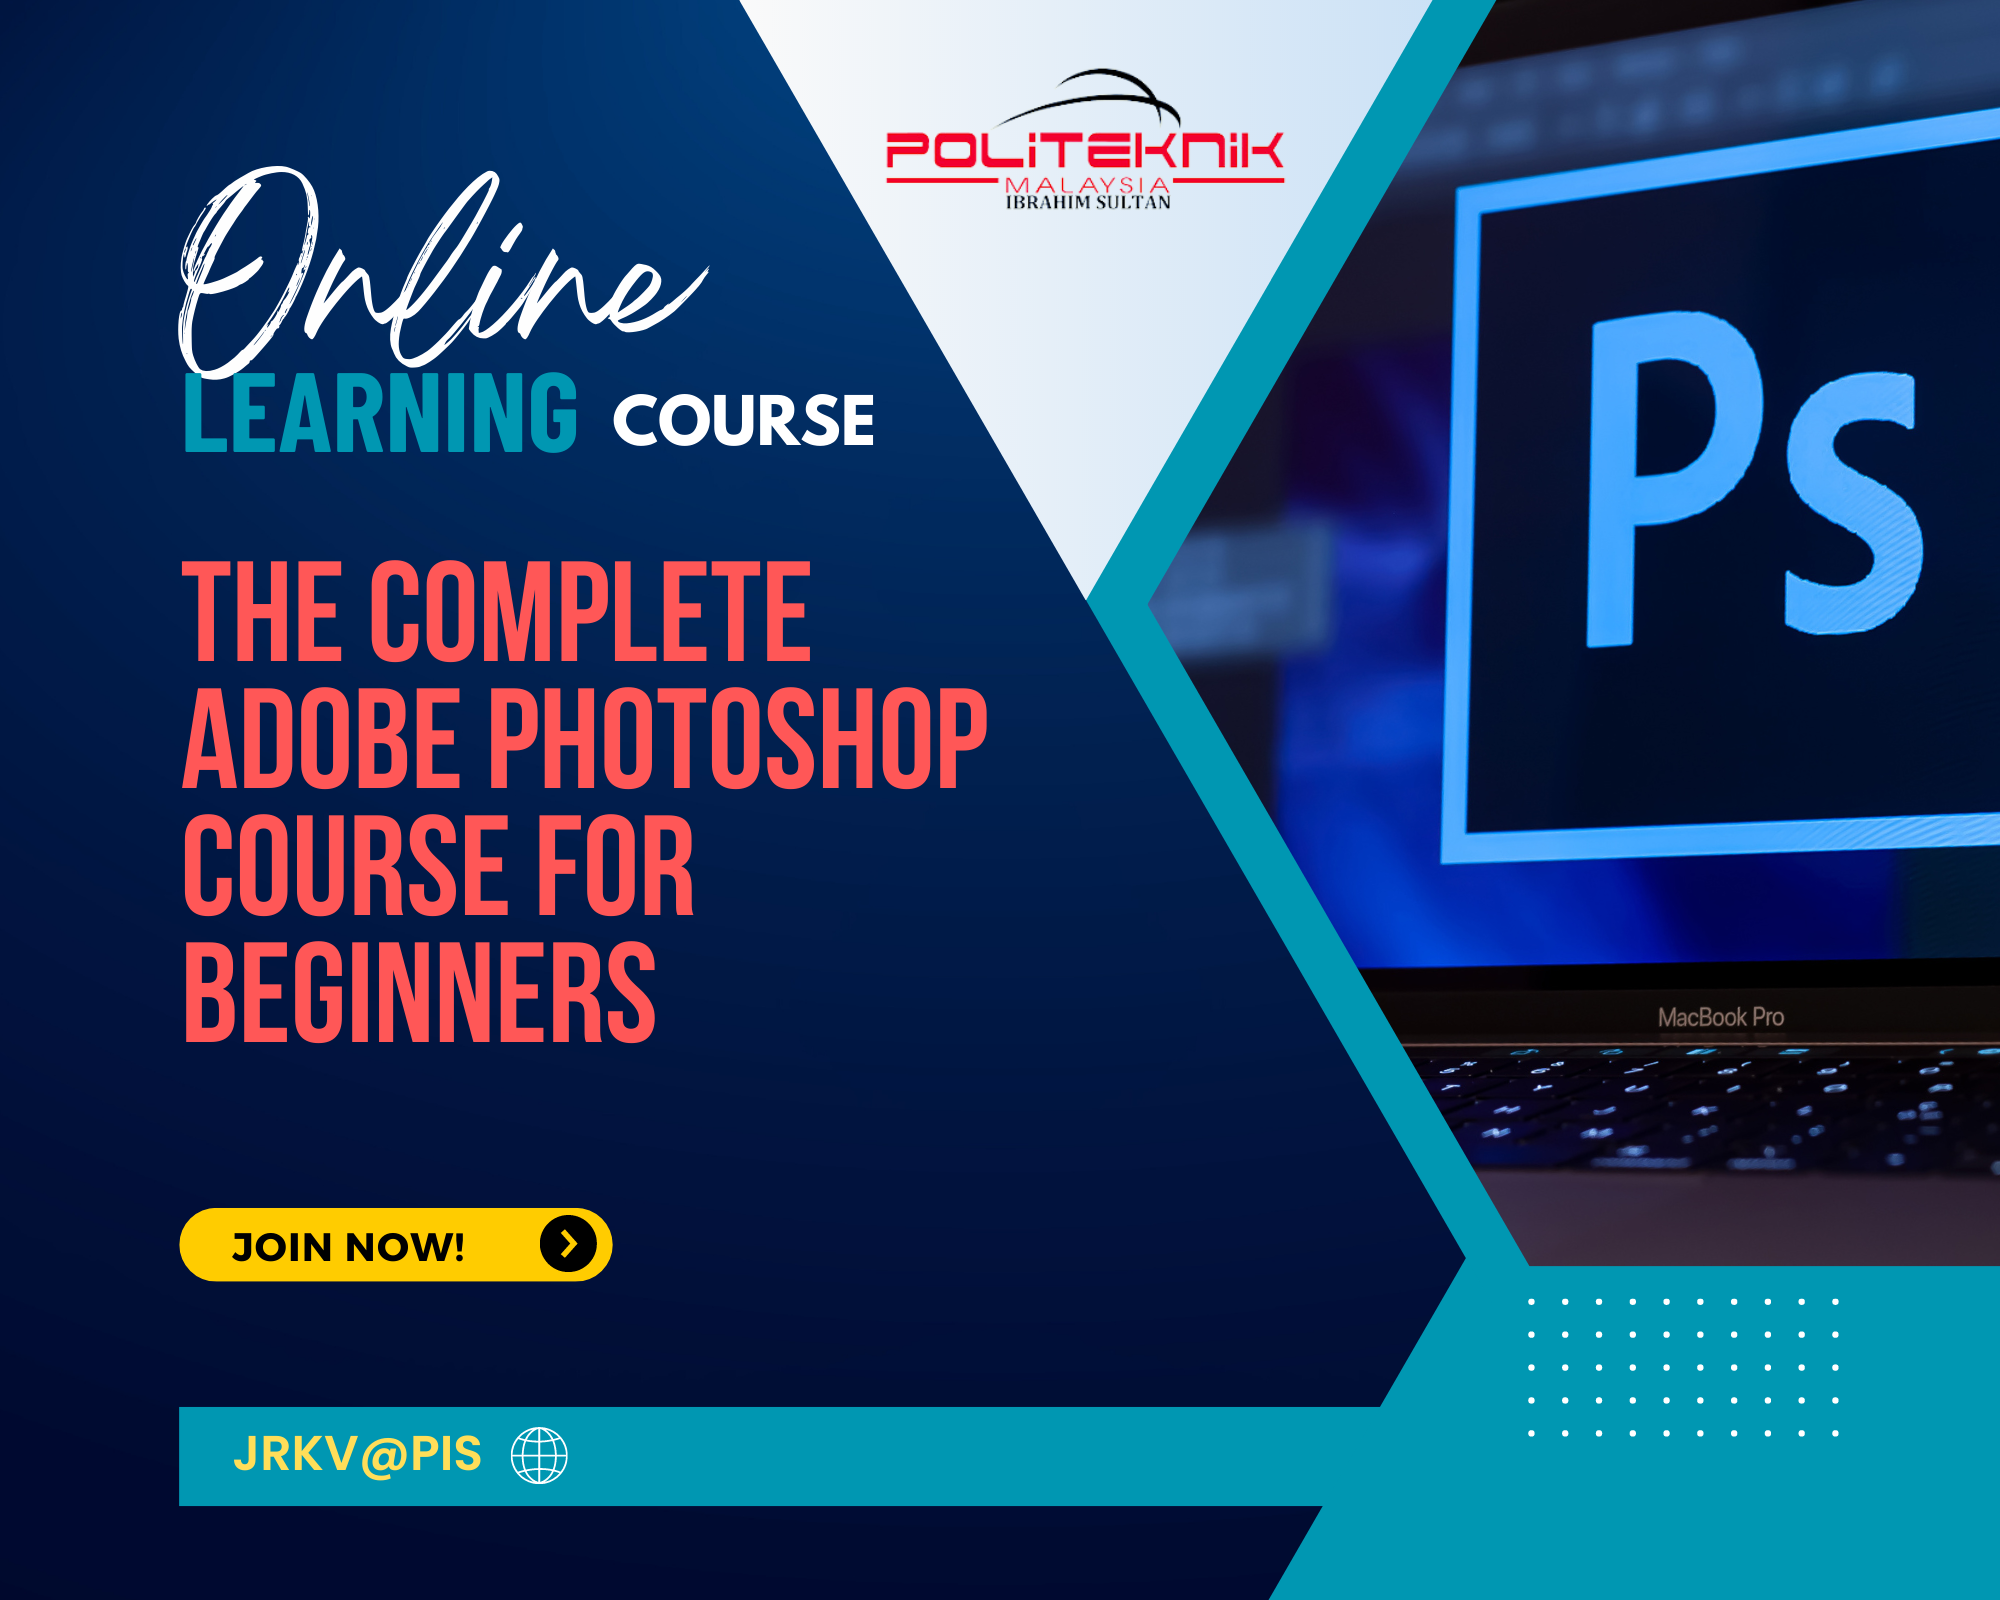 The Complete Adobe Photoshop Course for Beginners